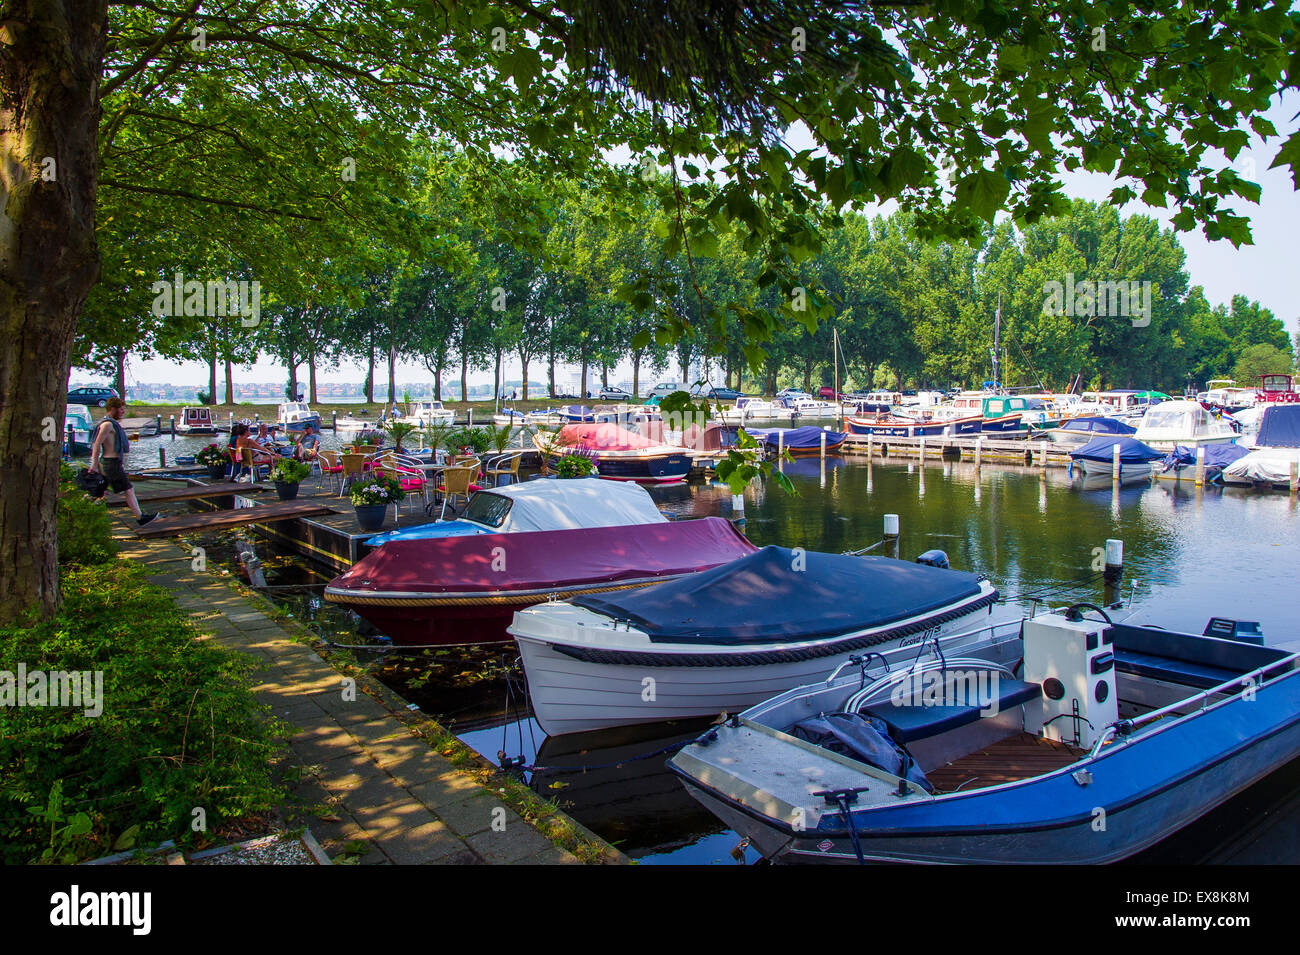 Yachts at the watersport club Haddock in Almere Stock Photo